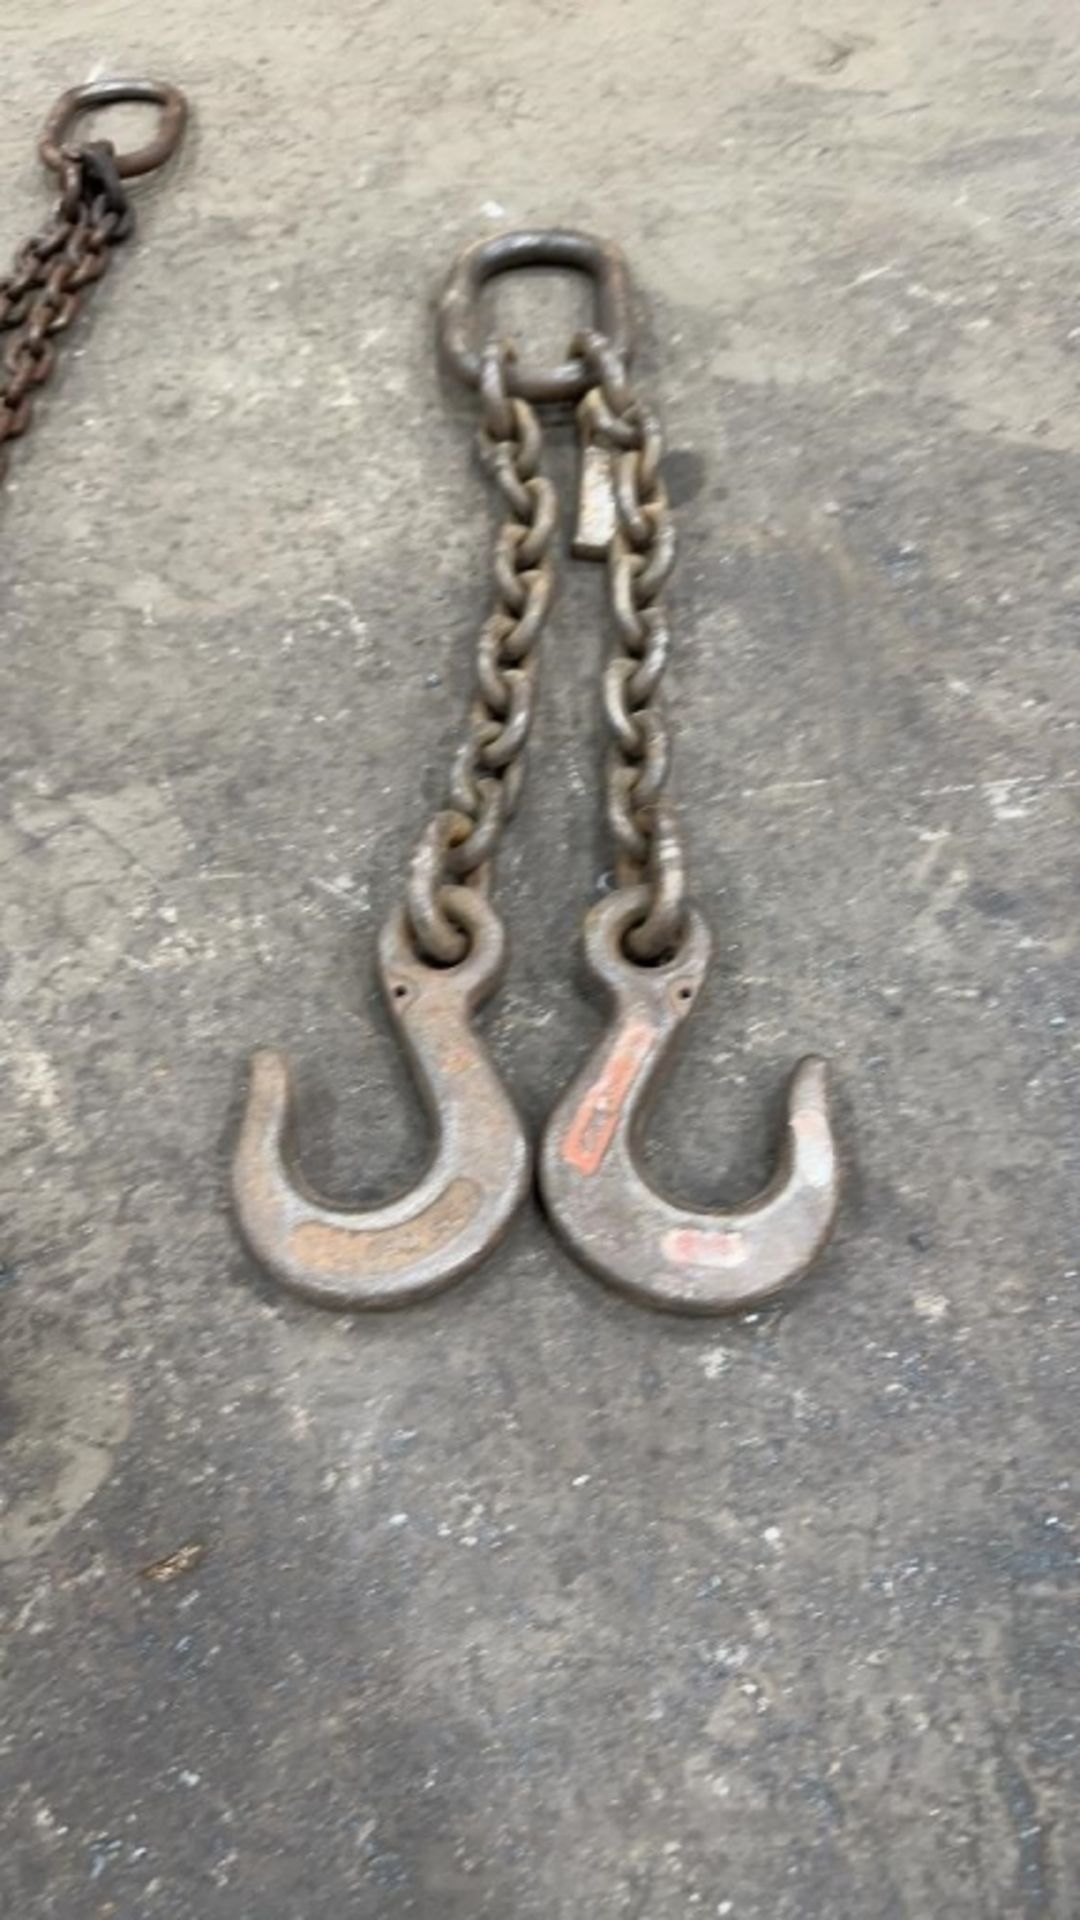 4ft & 2ft Chains on Rigging Rings with Hoist Hooks - Image 3 of 8